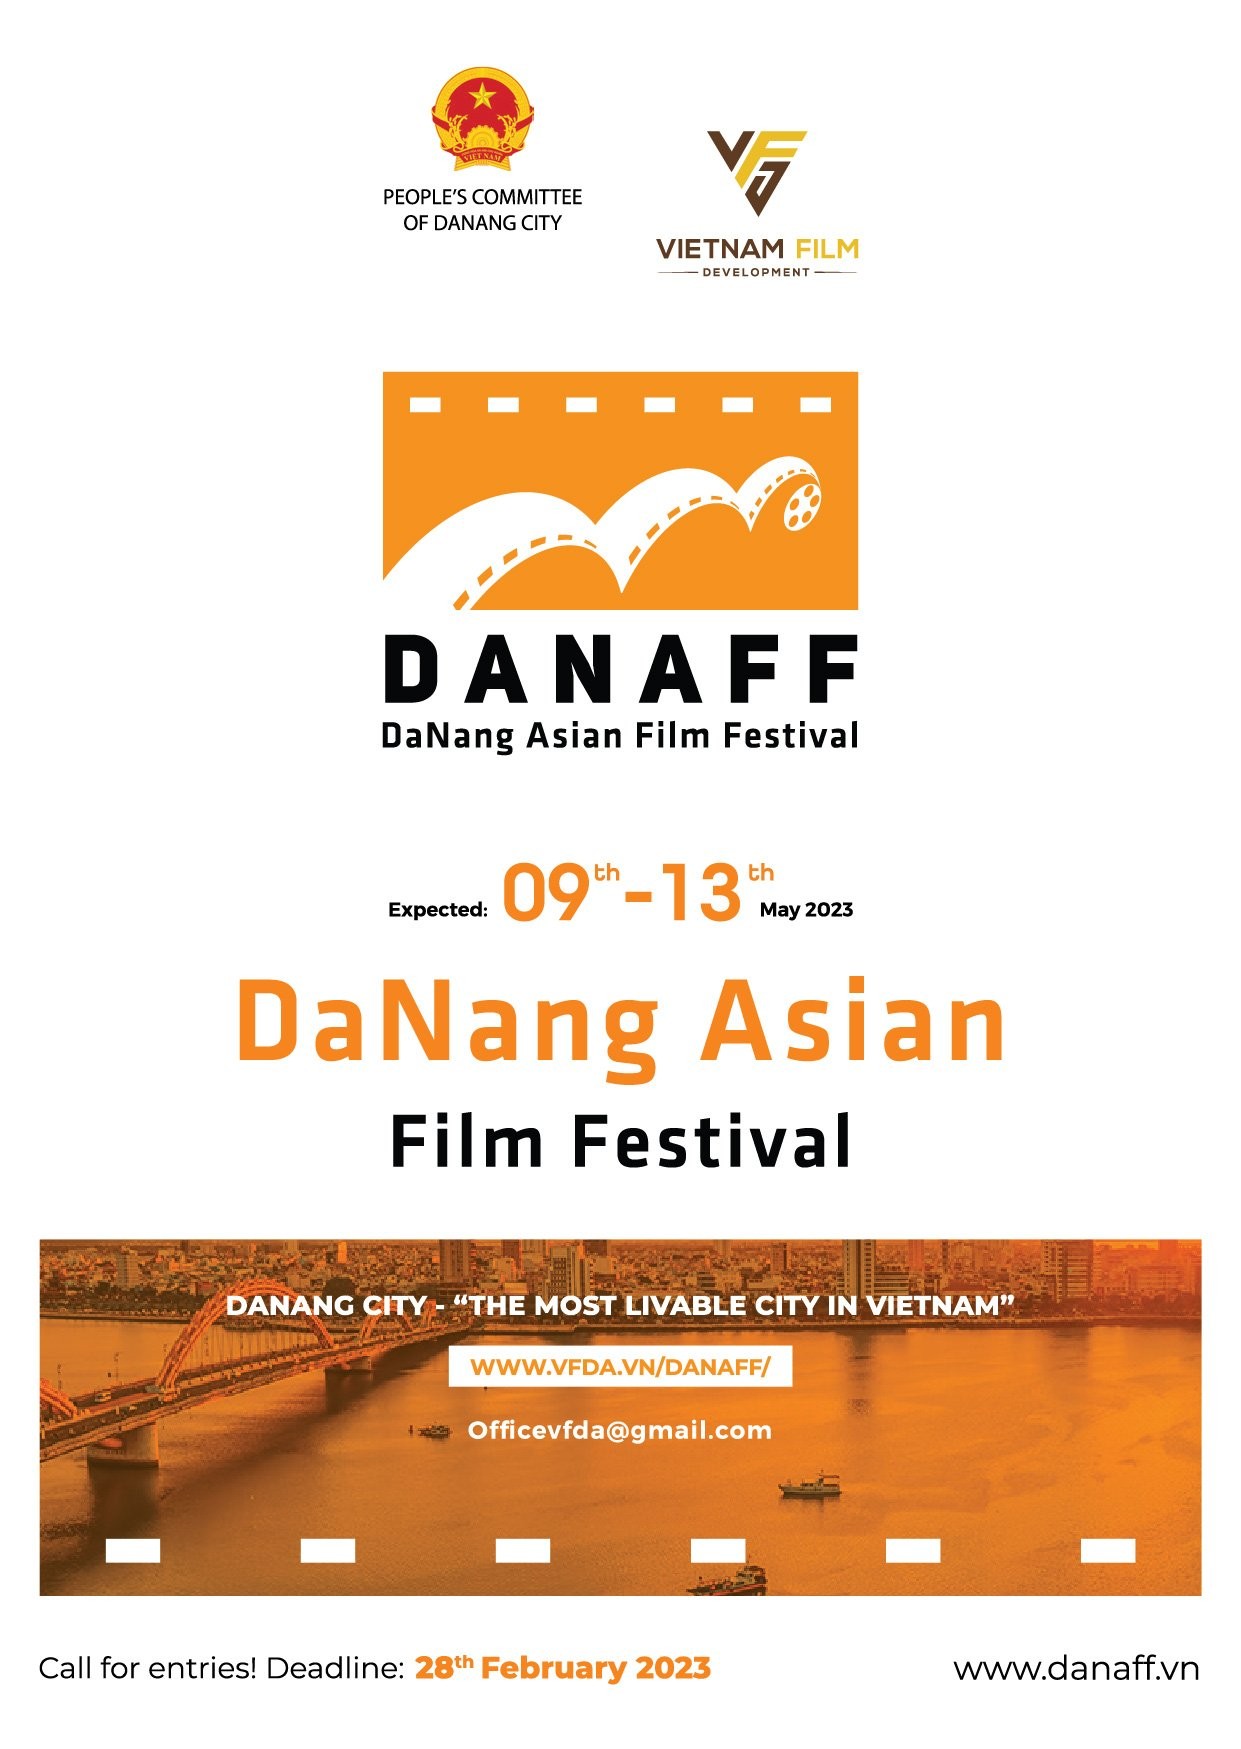 the-1st-danang-asian-film-festival-scheduled-to-be-held-from-may-9th-13th-dien-dan-du-lich-dulichvn-1-1676360833.jpg